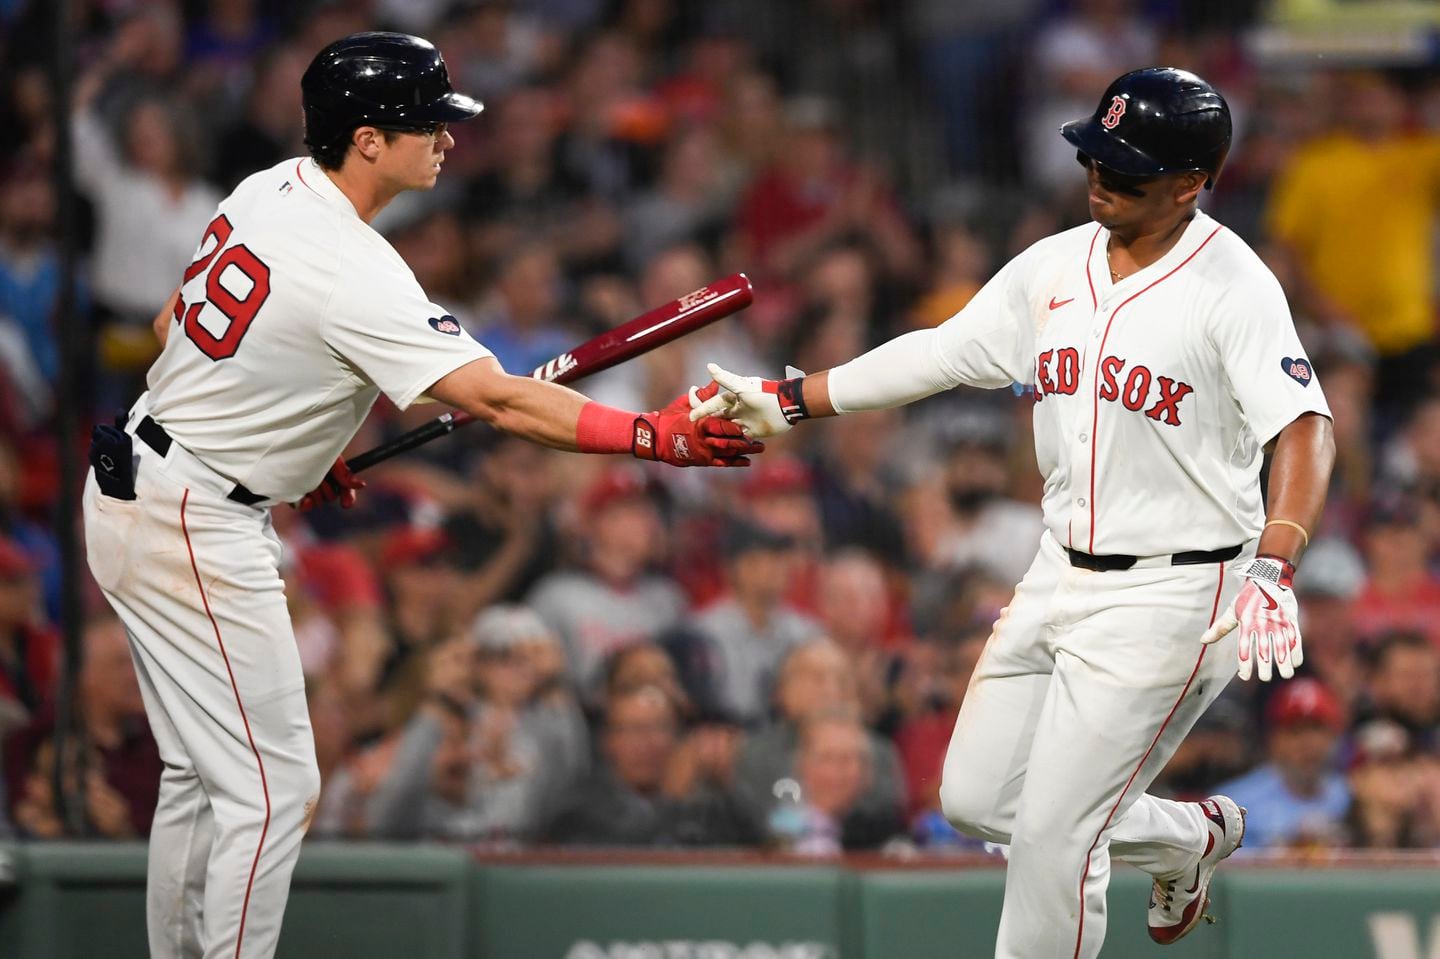 Bobby Dalbec ( left), greets Rafael Devers at home after scoring off a sacrifice fly hit by Jamie Westbrook during the fourth inning. It was the Red Sox' first run and the start of rally against the Phillies.